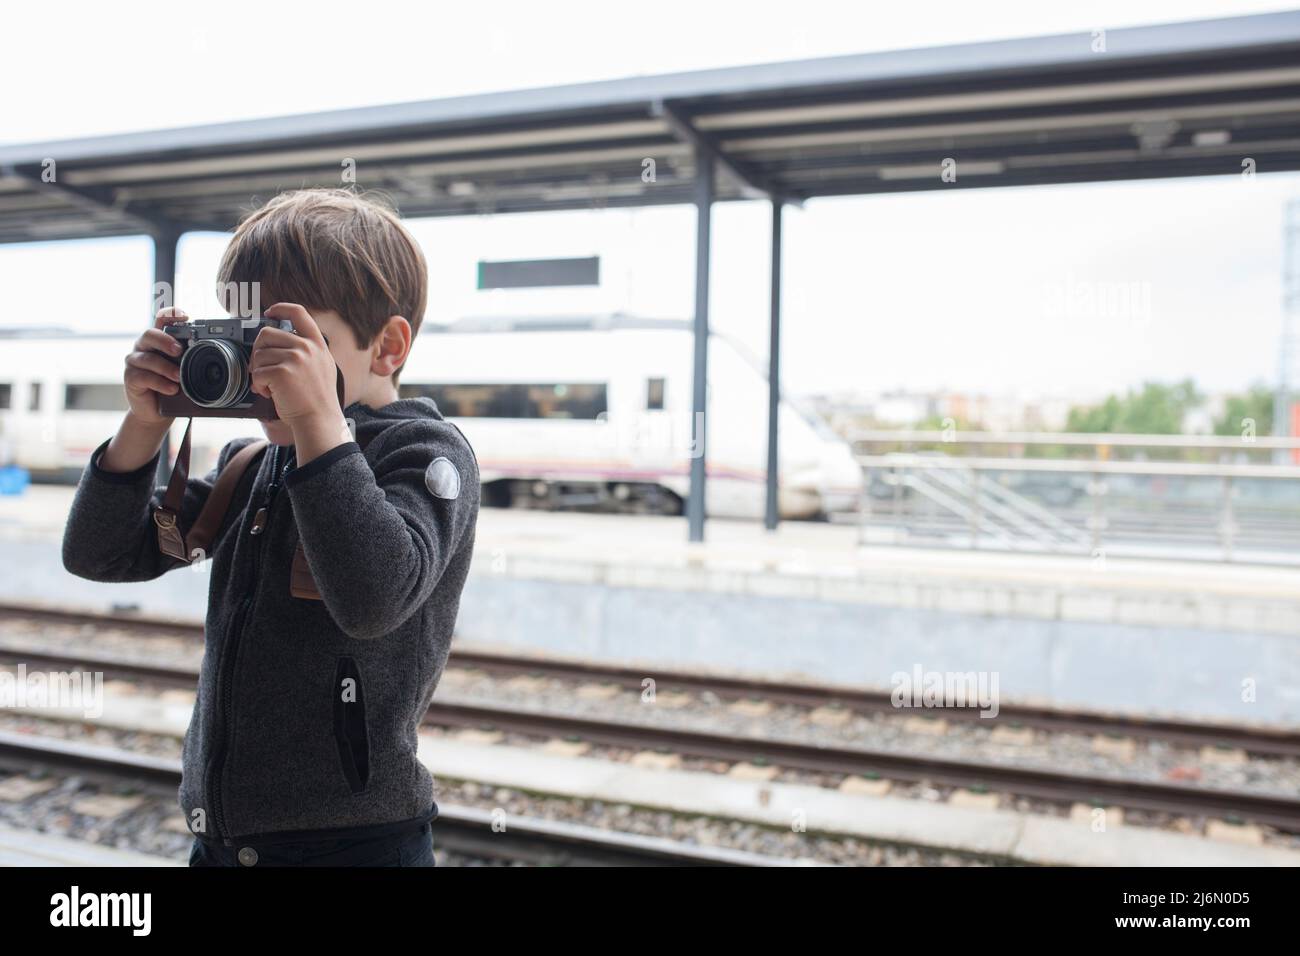 Child boy taking pictures at railway station. Travel on train with children concept. Stock Photo